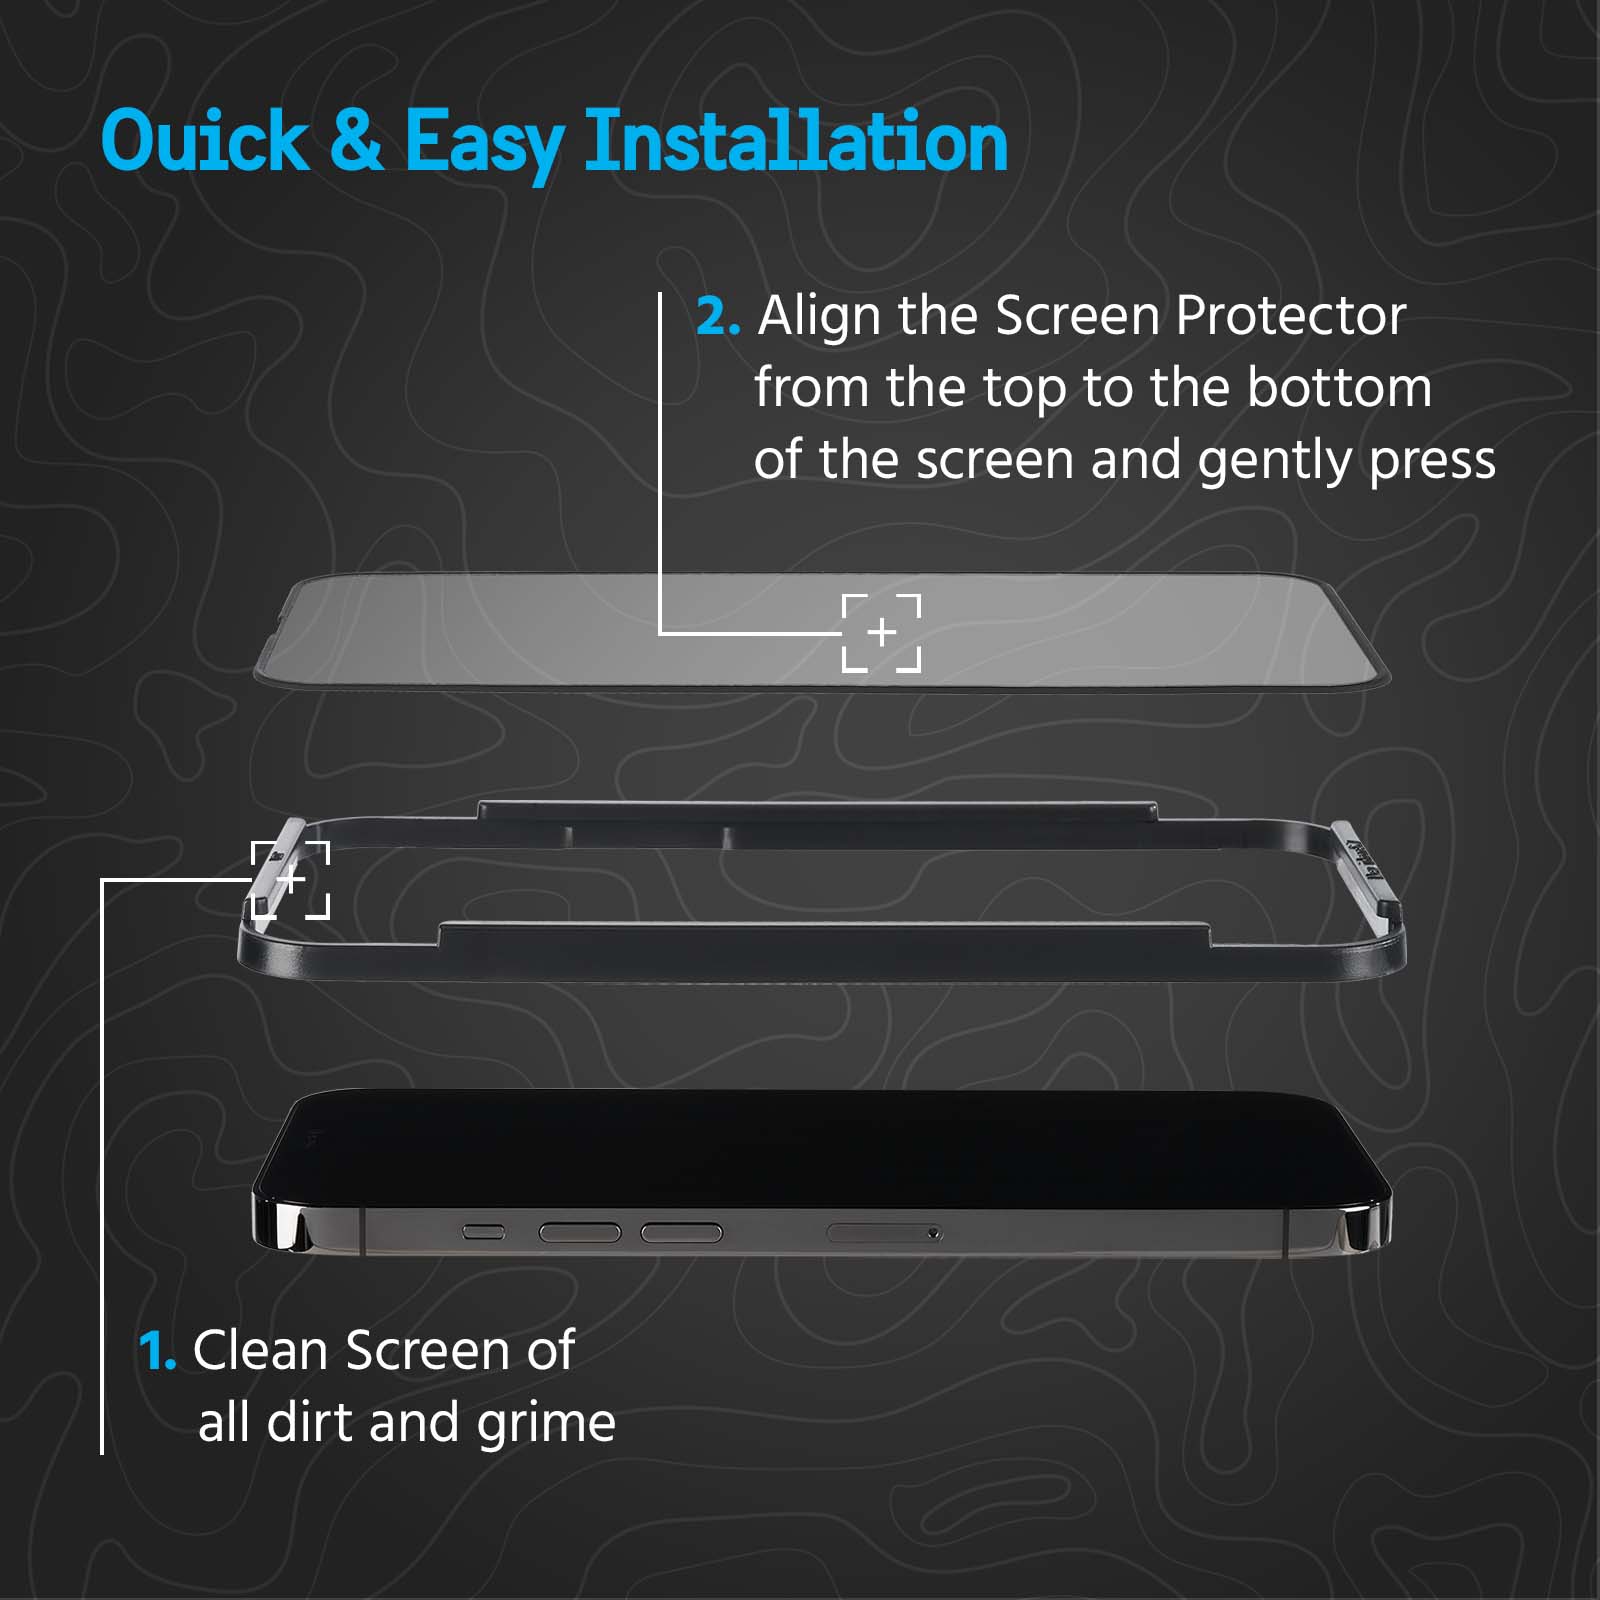 Quick & Easy Installation. 1. clean screen of all dirt and grime. 2. Align the screen protector from the top tot he bottom of screen and gently press. color::clear